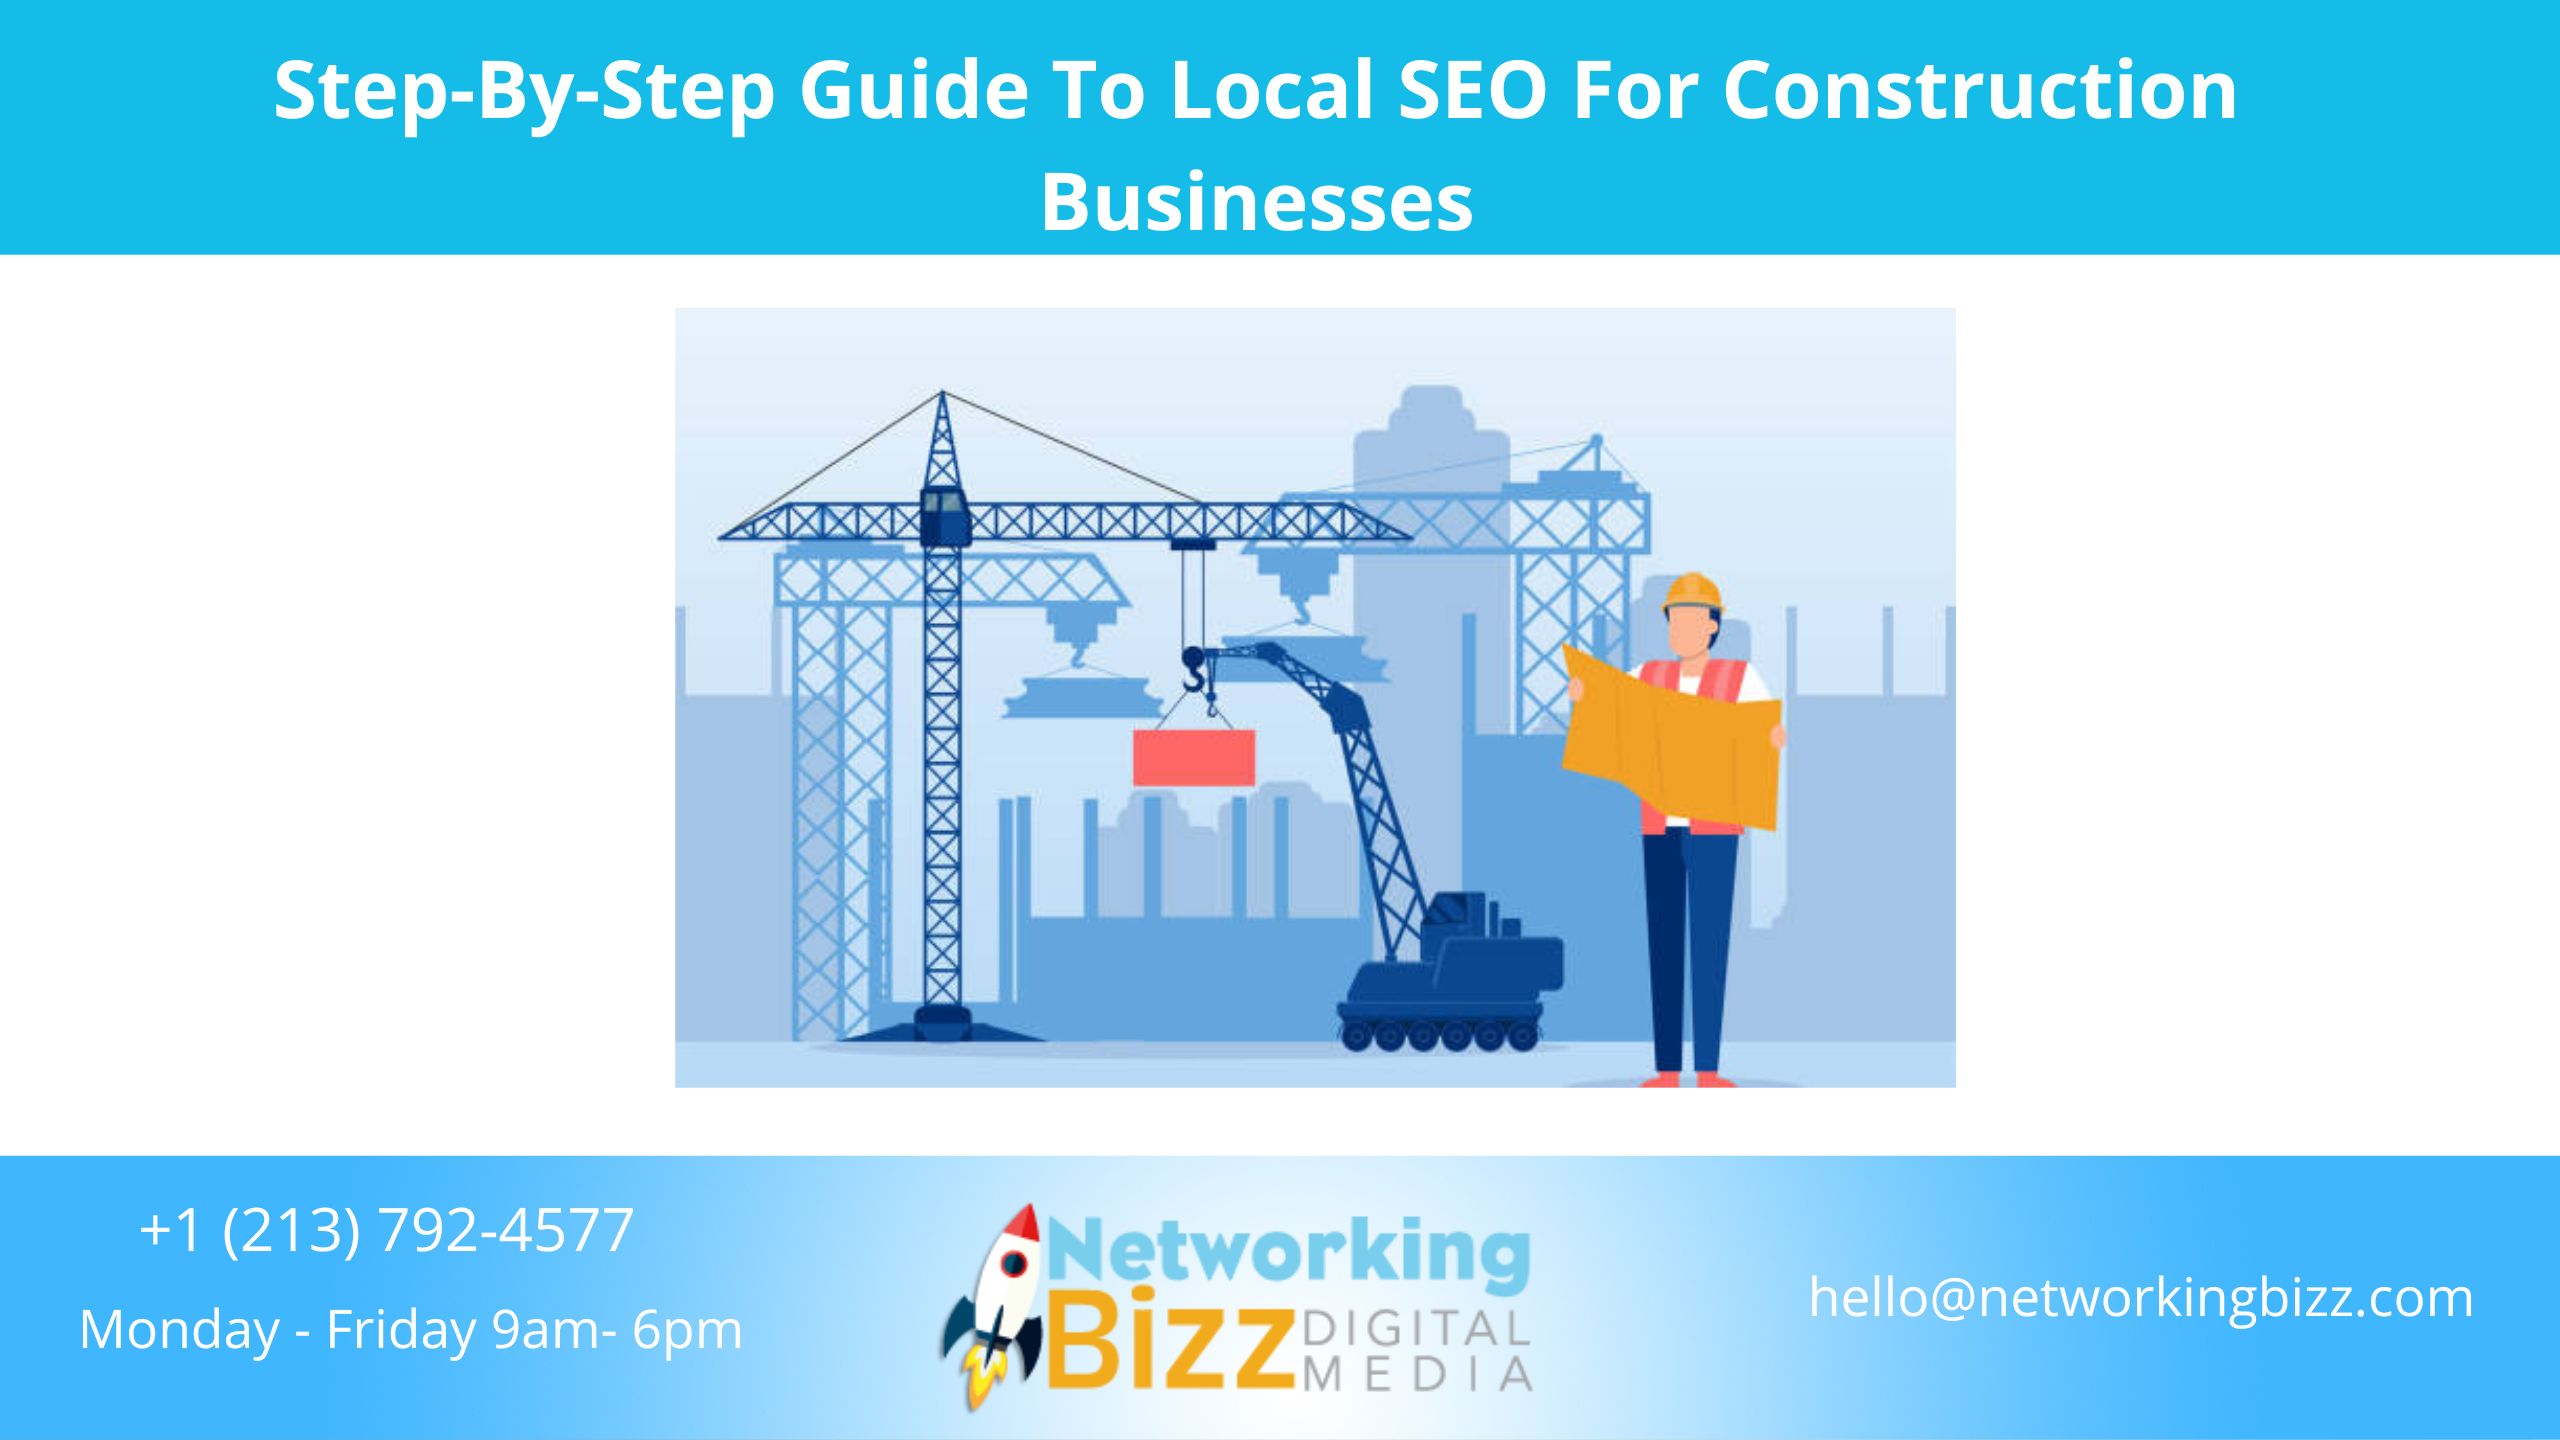 Step-By-Step Guide To Local SEO For Construction Businesses